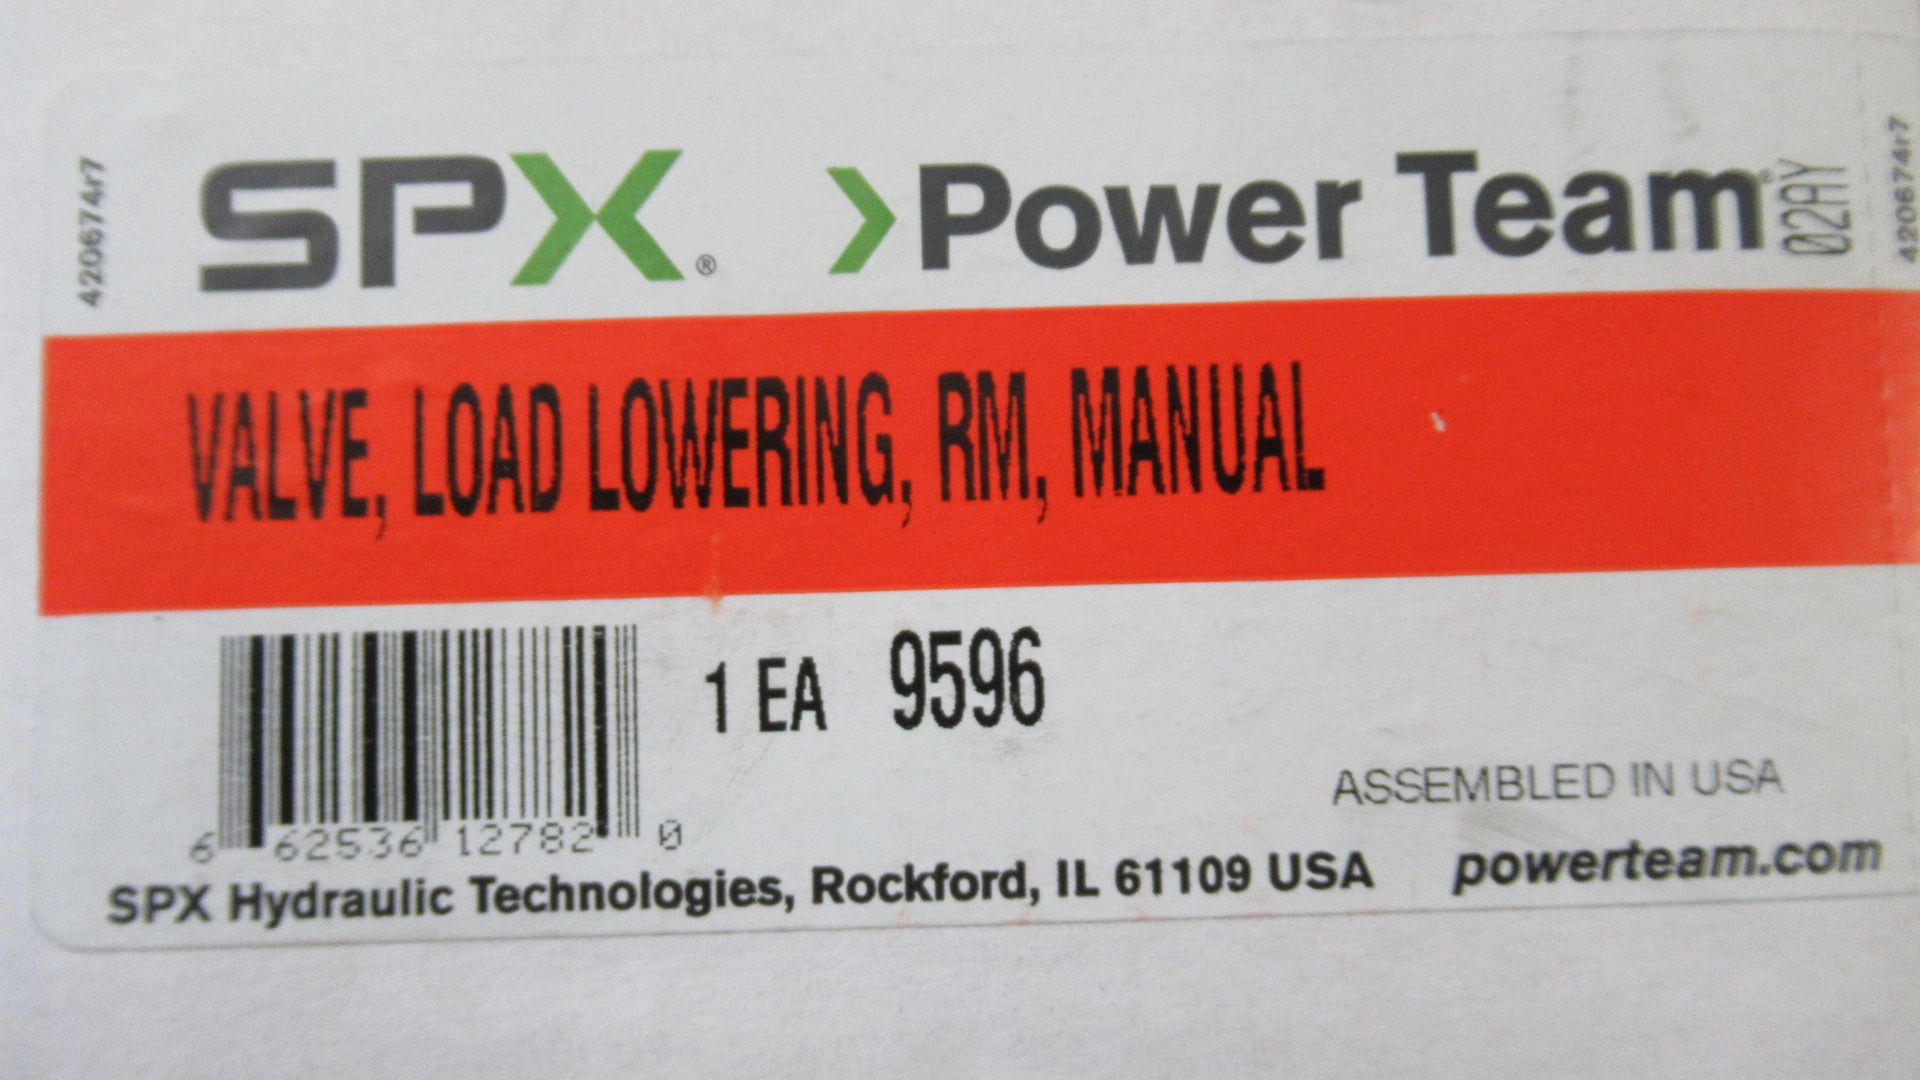 VALVE LOAD LOWERING RM MANUAL SPX 9596 - Image 2 of 2